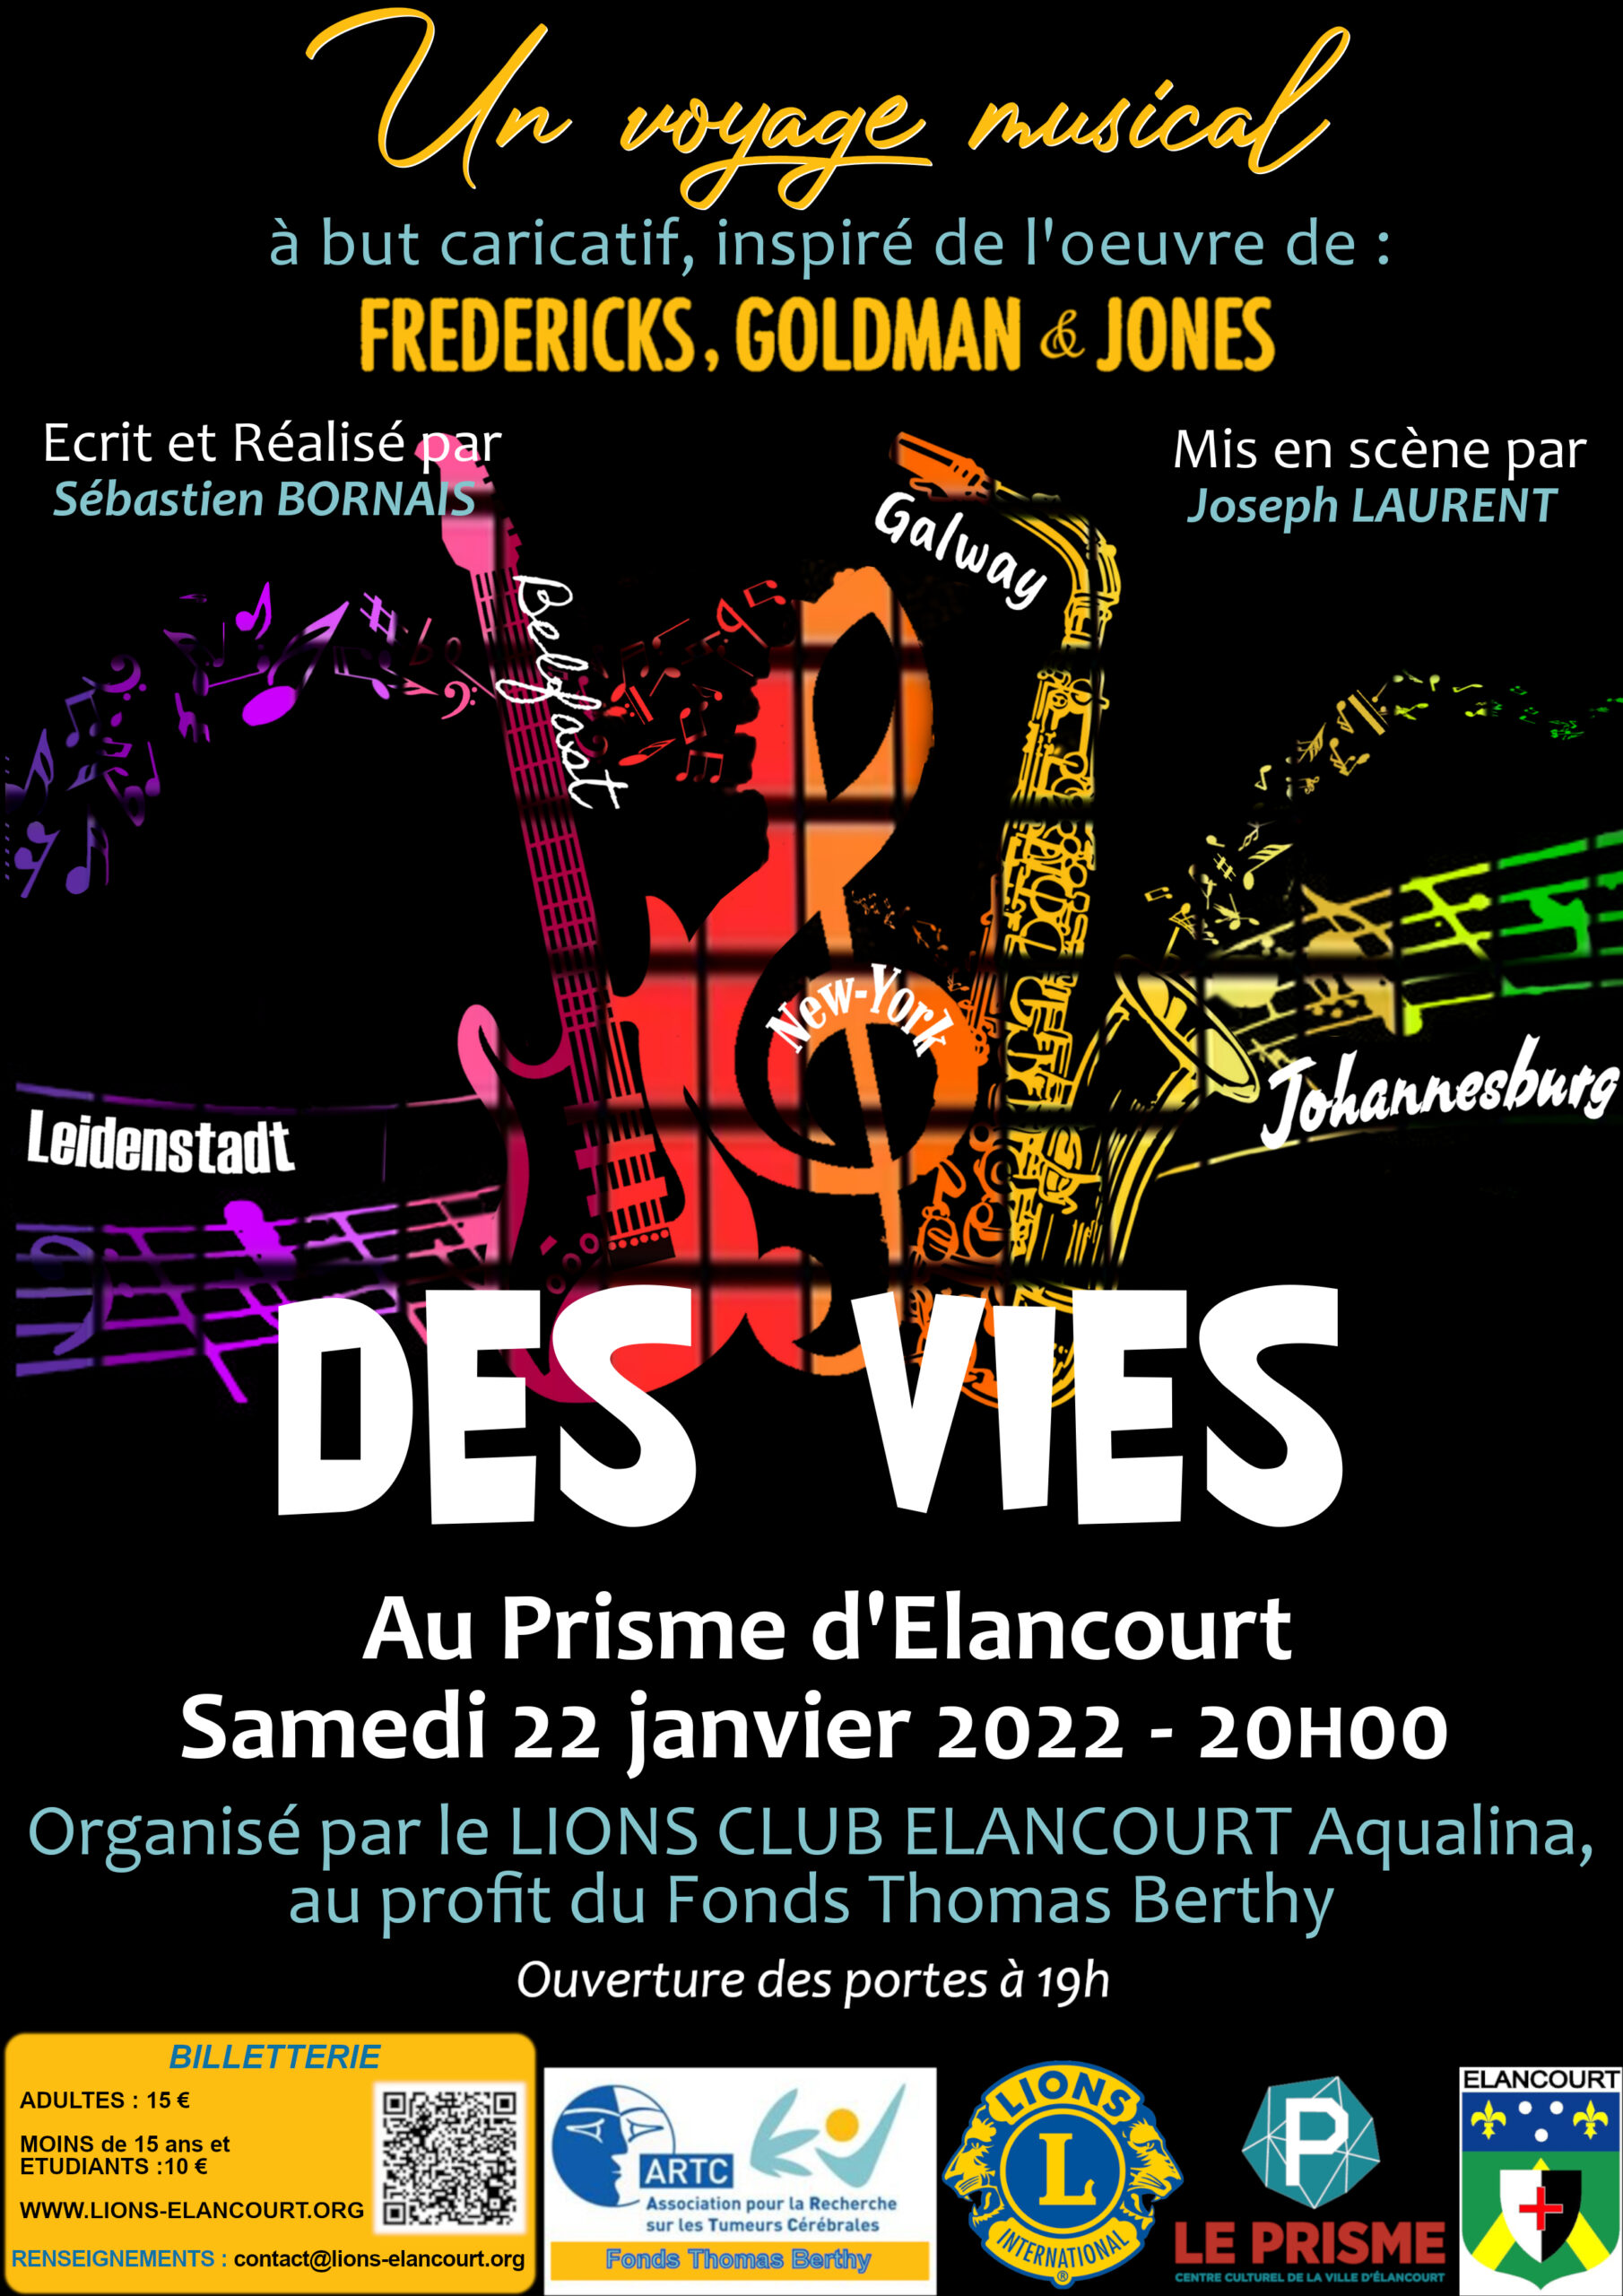 SPECTACLE MUSICAL "DES VIES"